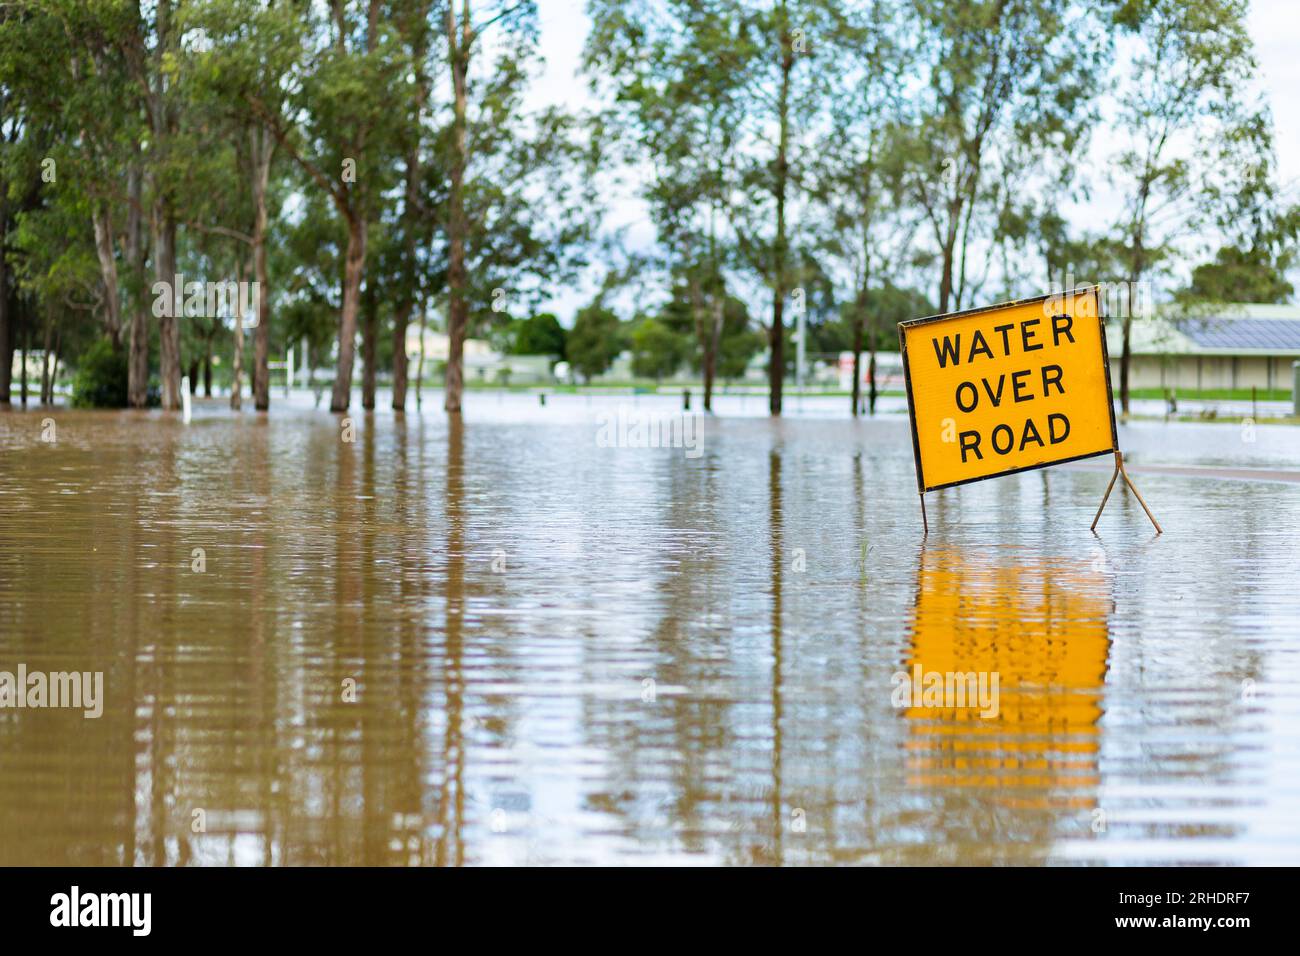 Water over road sign going under floodwaters as flood water rises Stock Photo